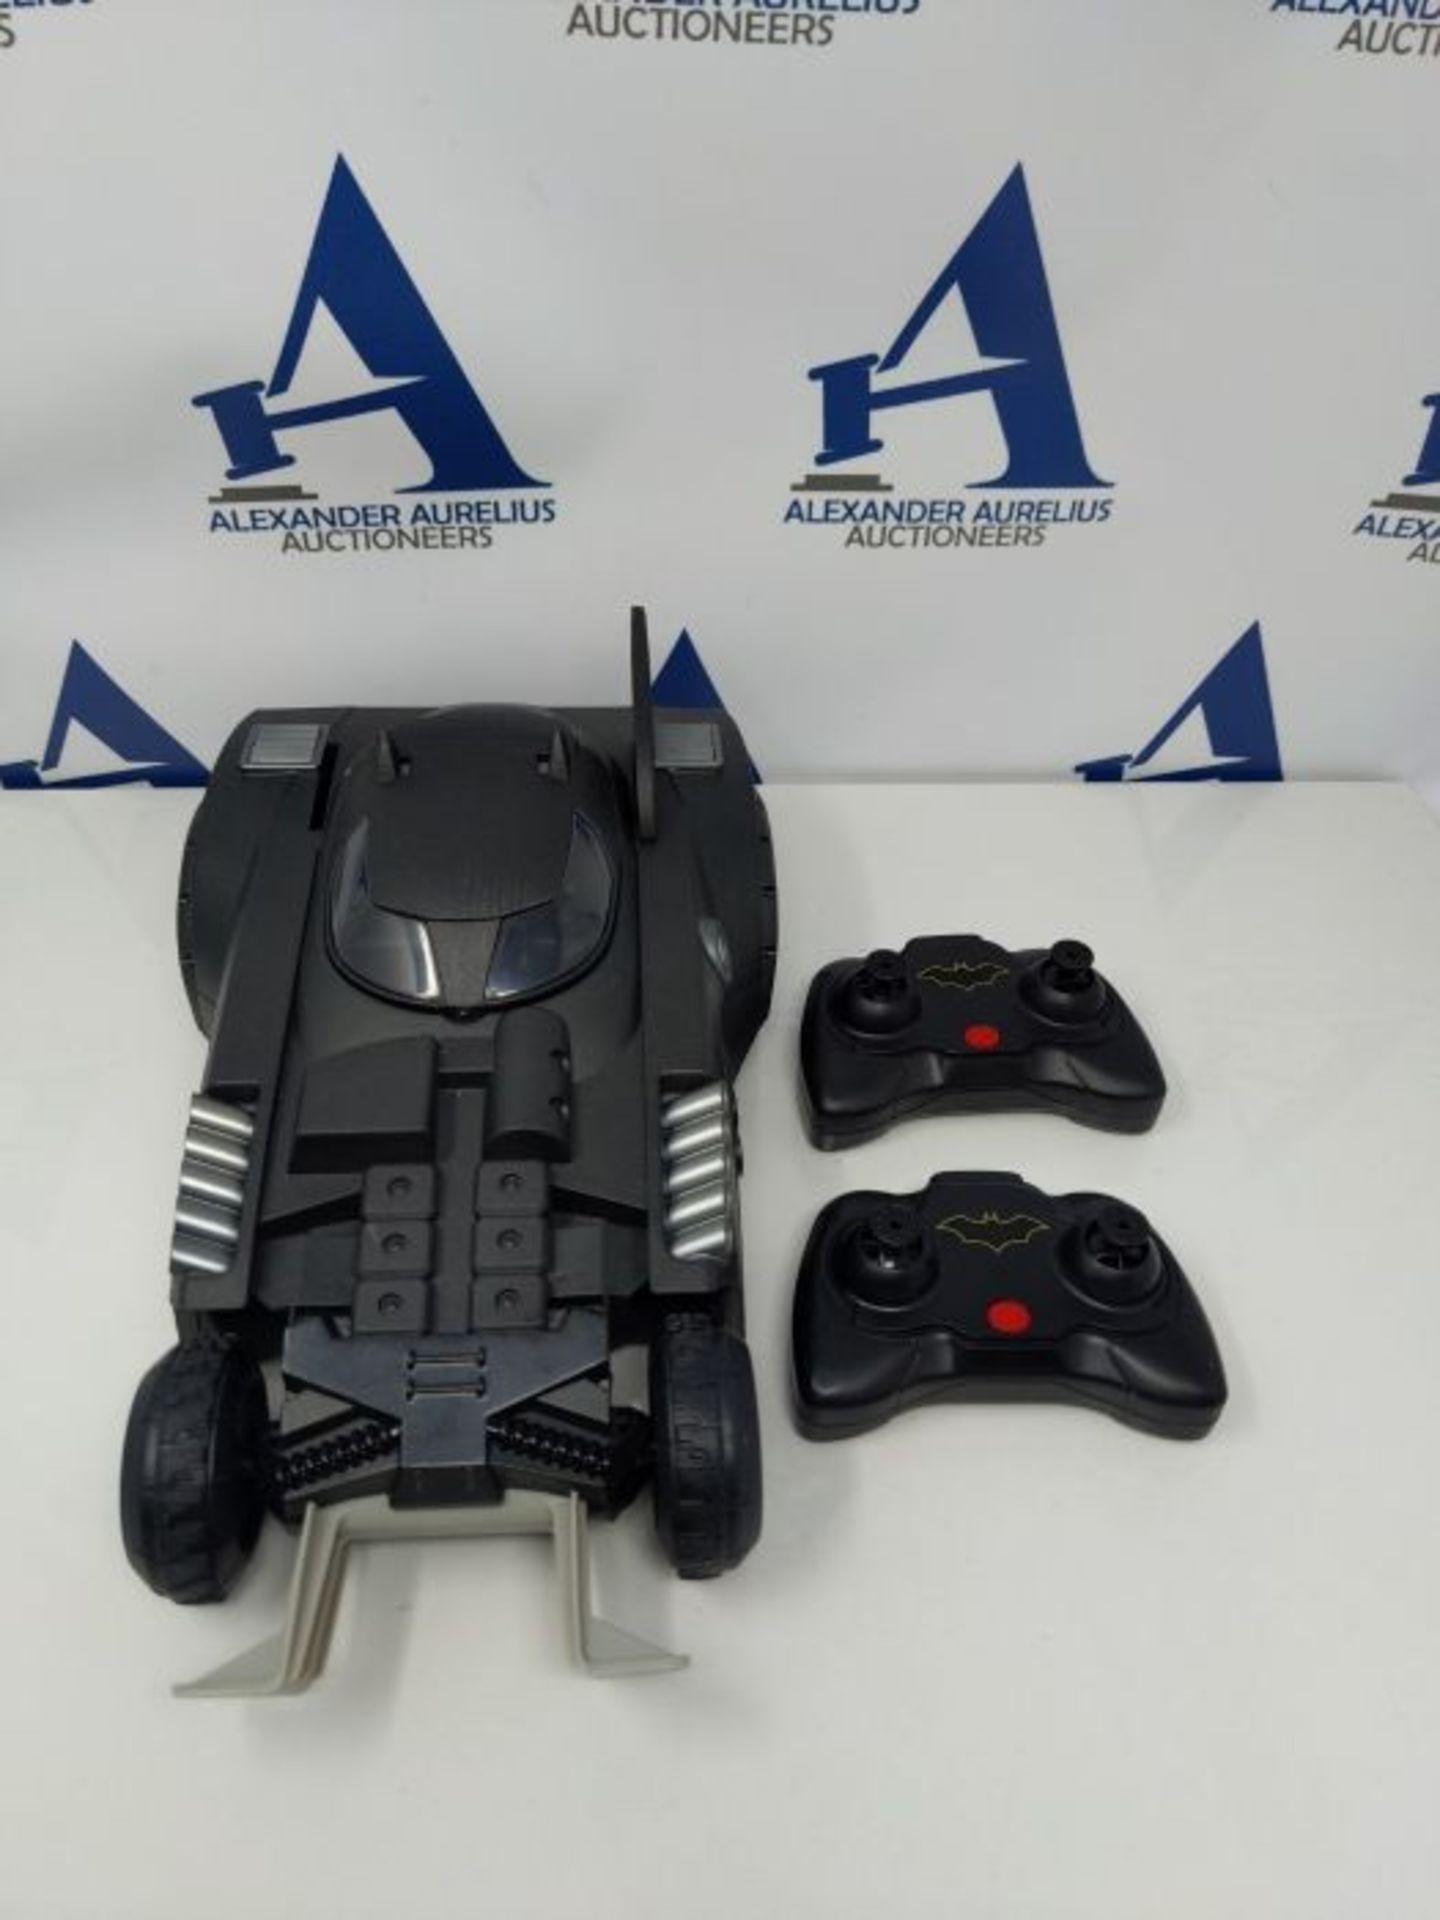 BATMAN Launch and Defend Batmobile Remote Control Vehicle with Exclusive 10 cm Action - Image 2 of 2